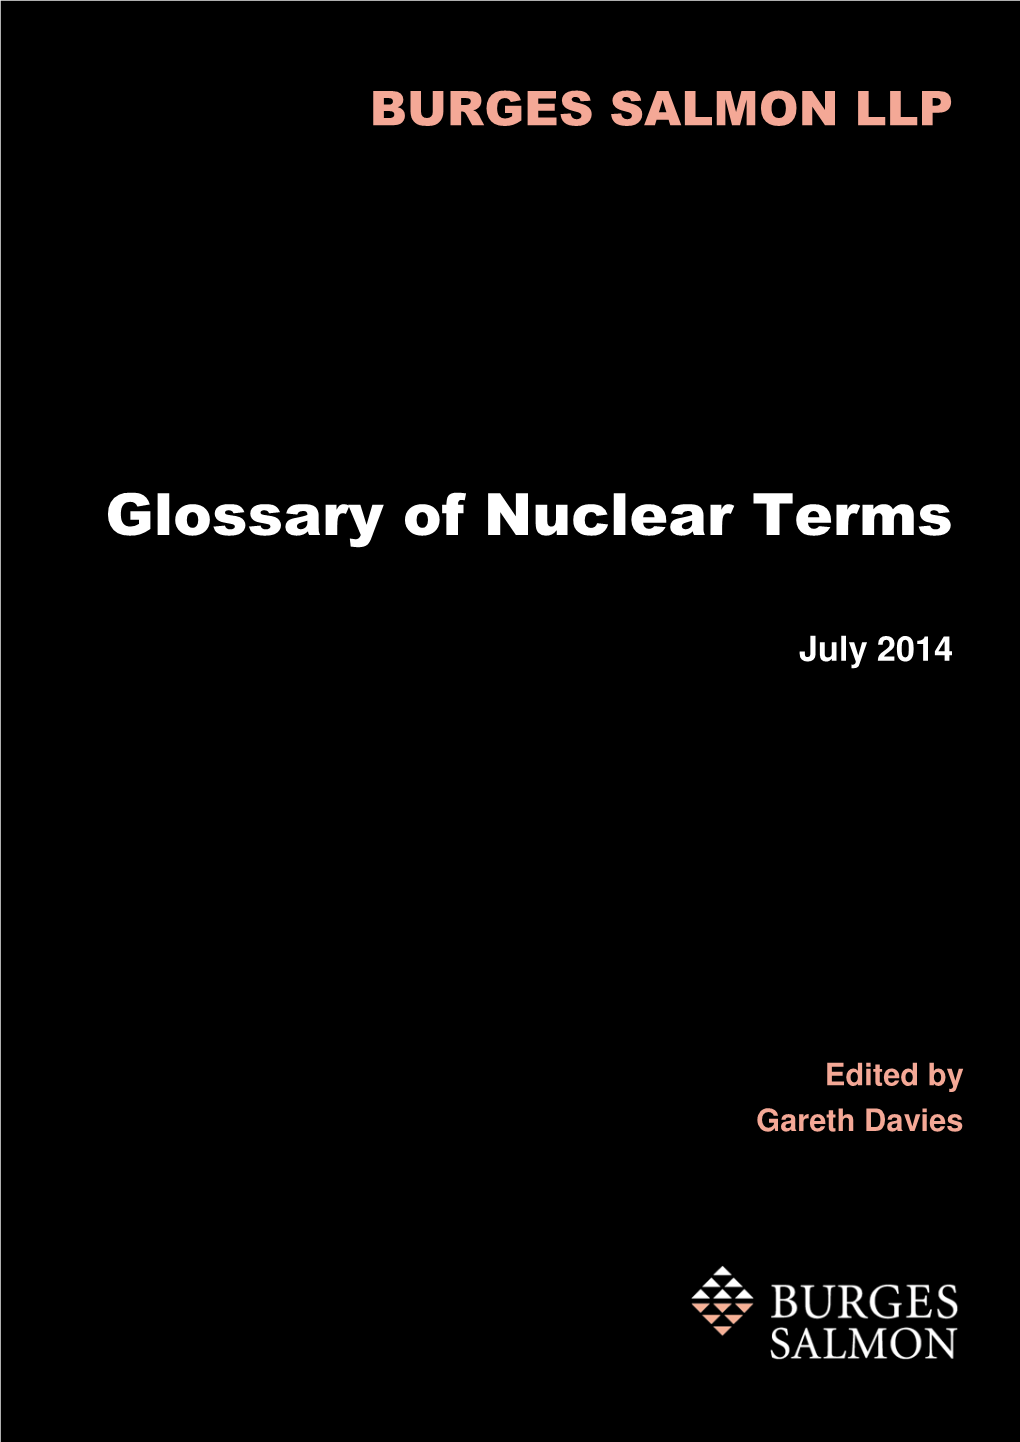 Glossary of Nuclear Terms